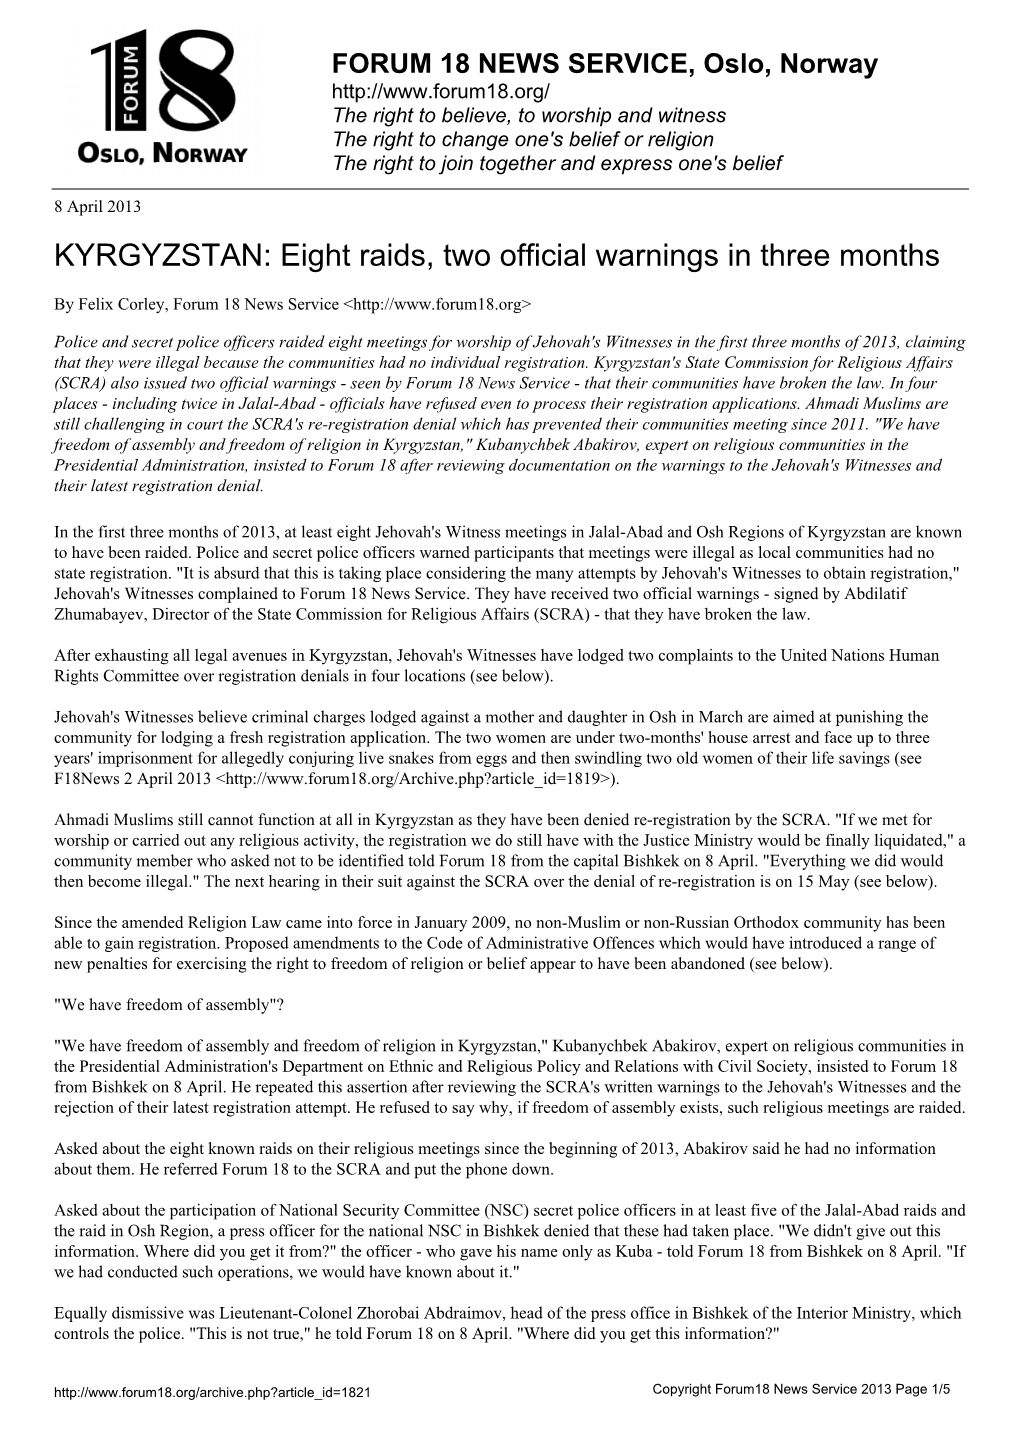 KYRGYZSTAN: Eight Raids, Two Official Warnings in Three Months